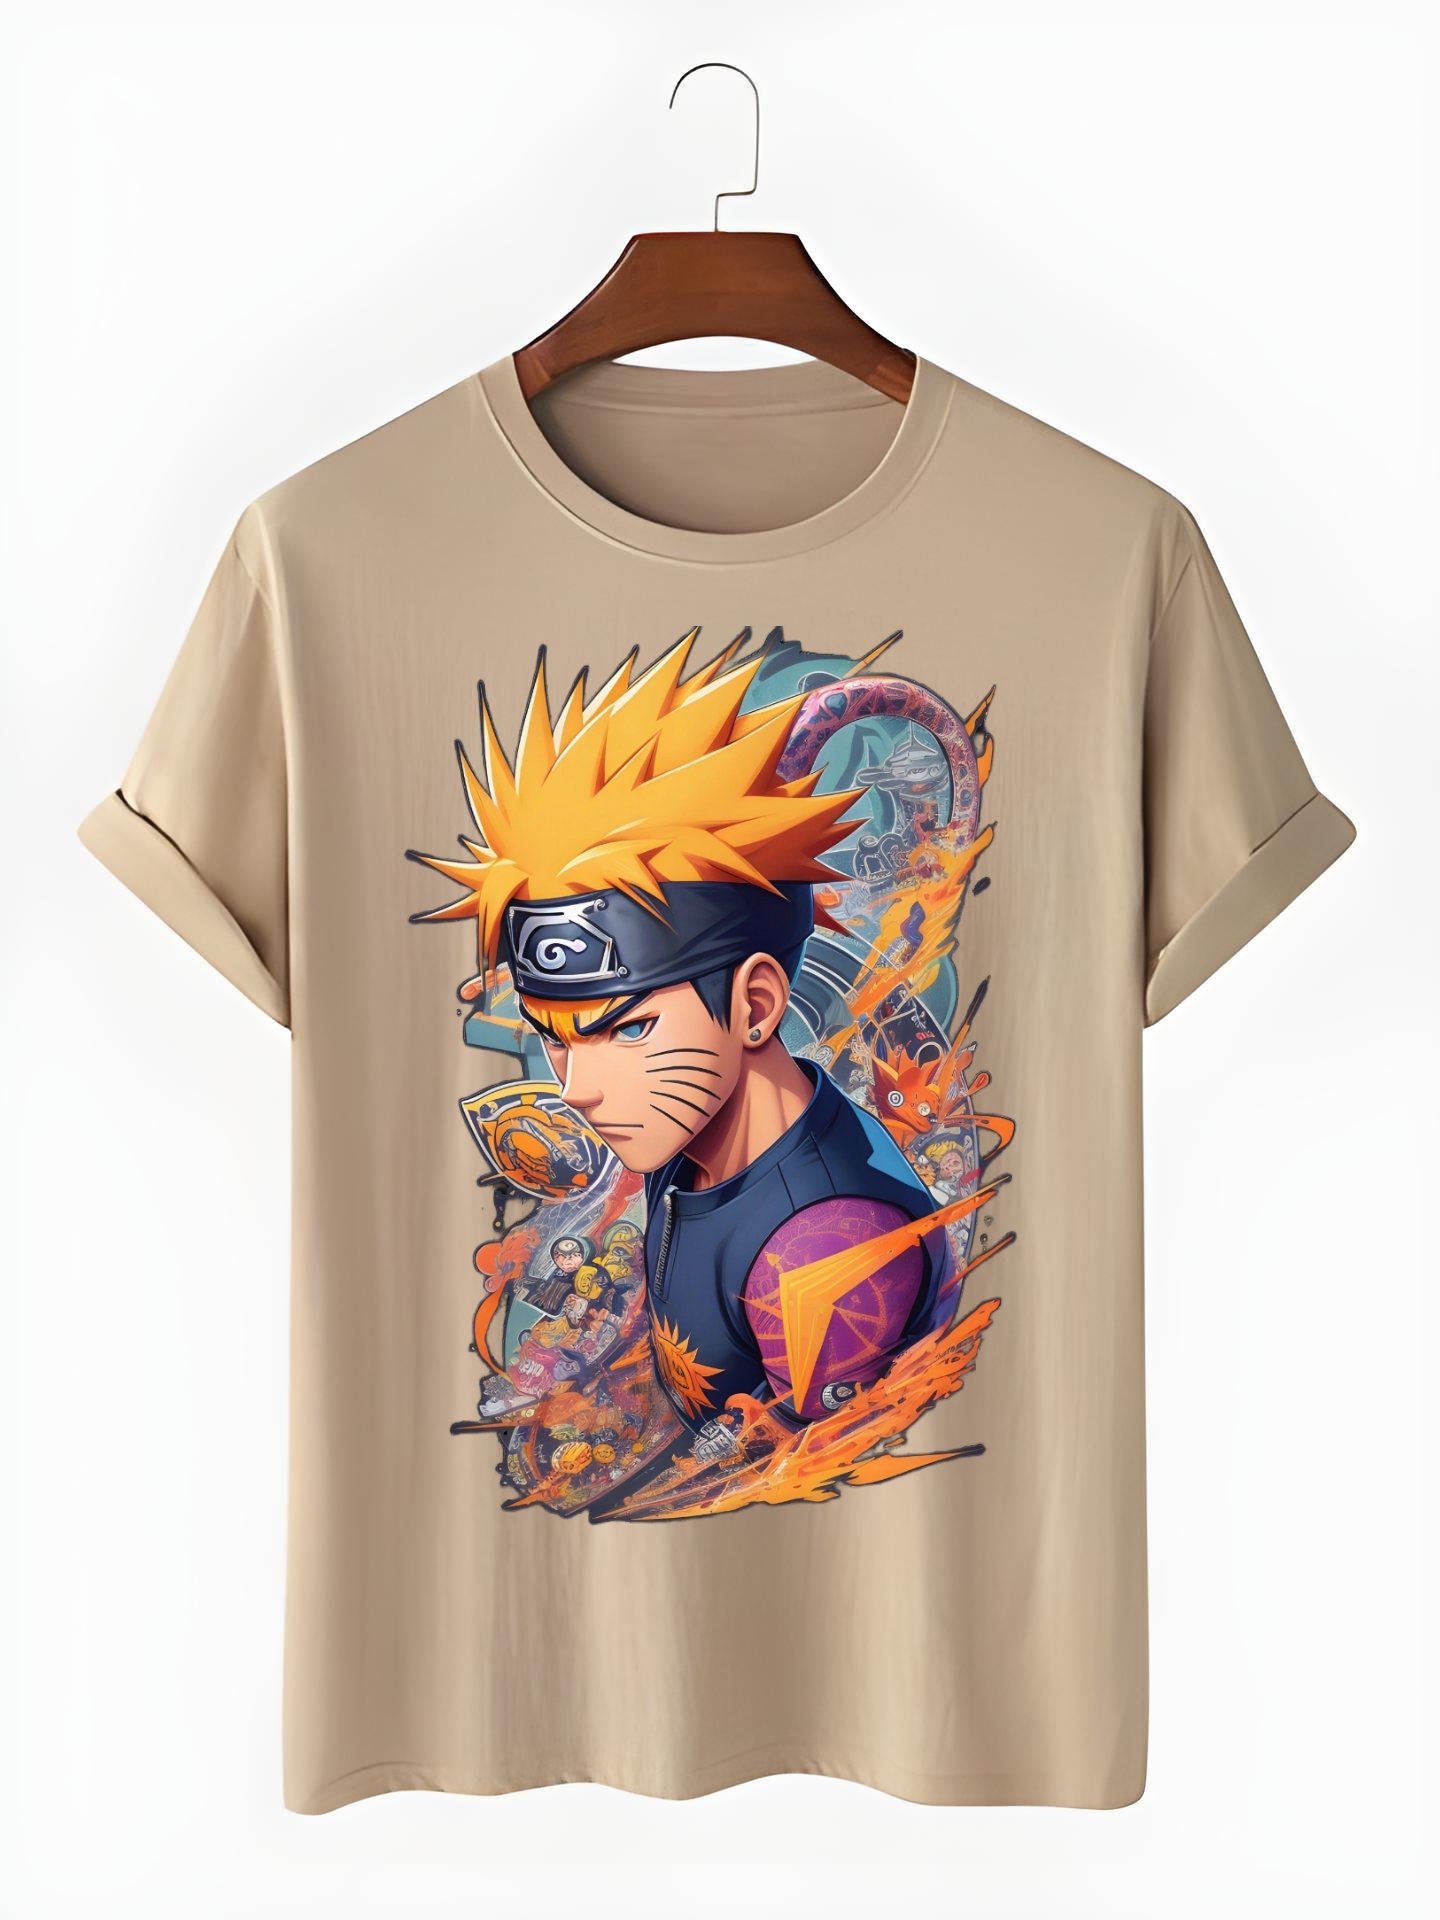 Naruto clothes - Buy the best product with free shipping on AliExpress